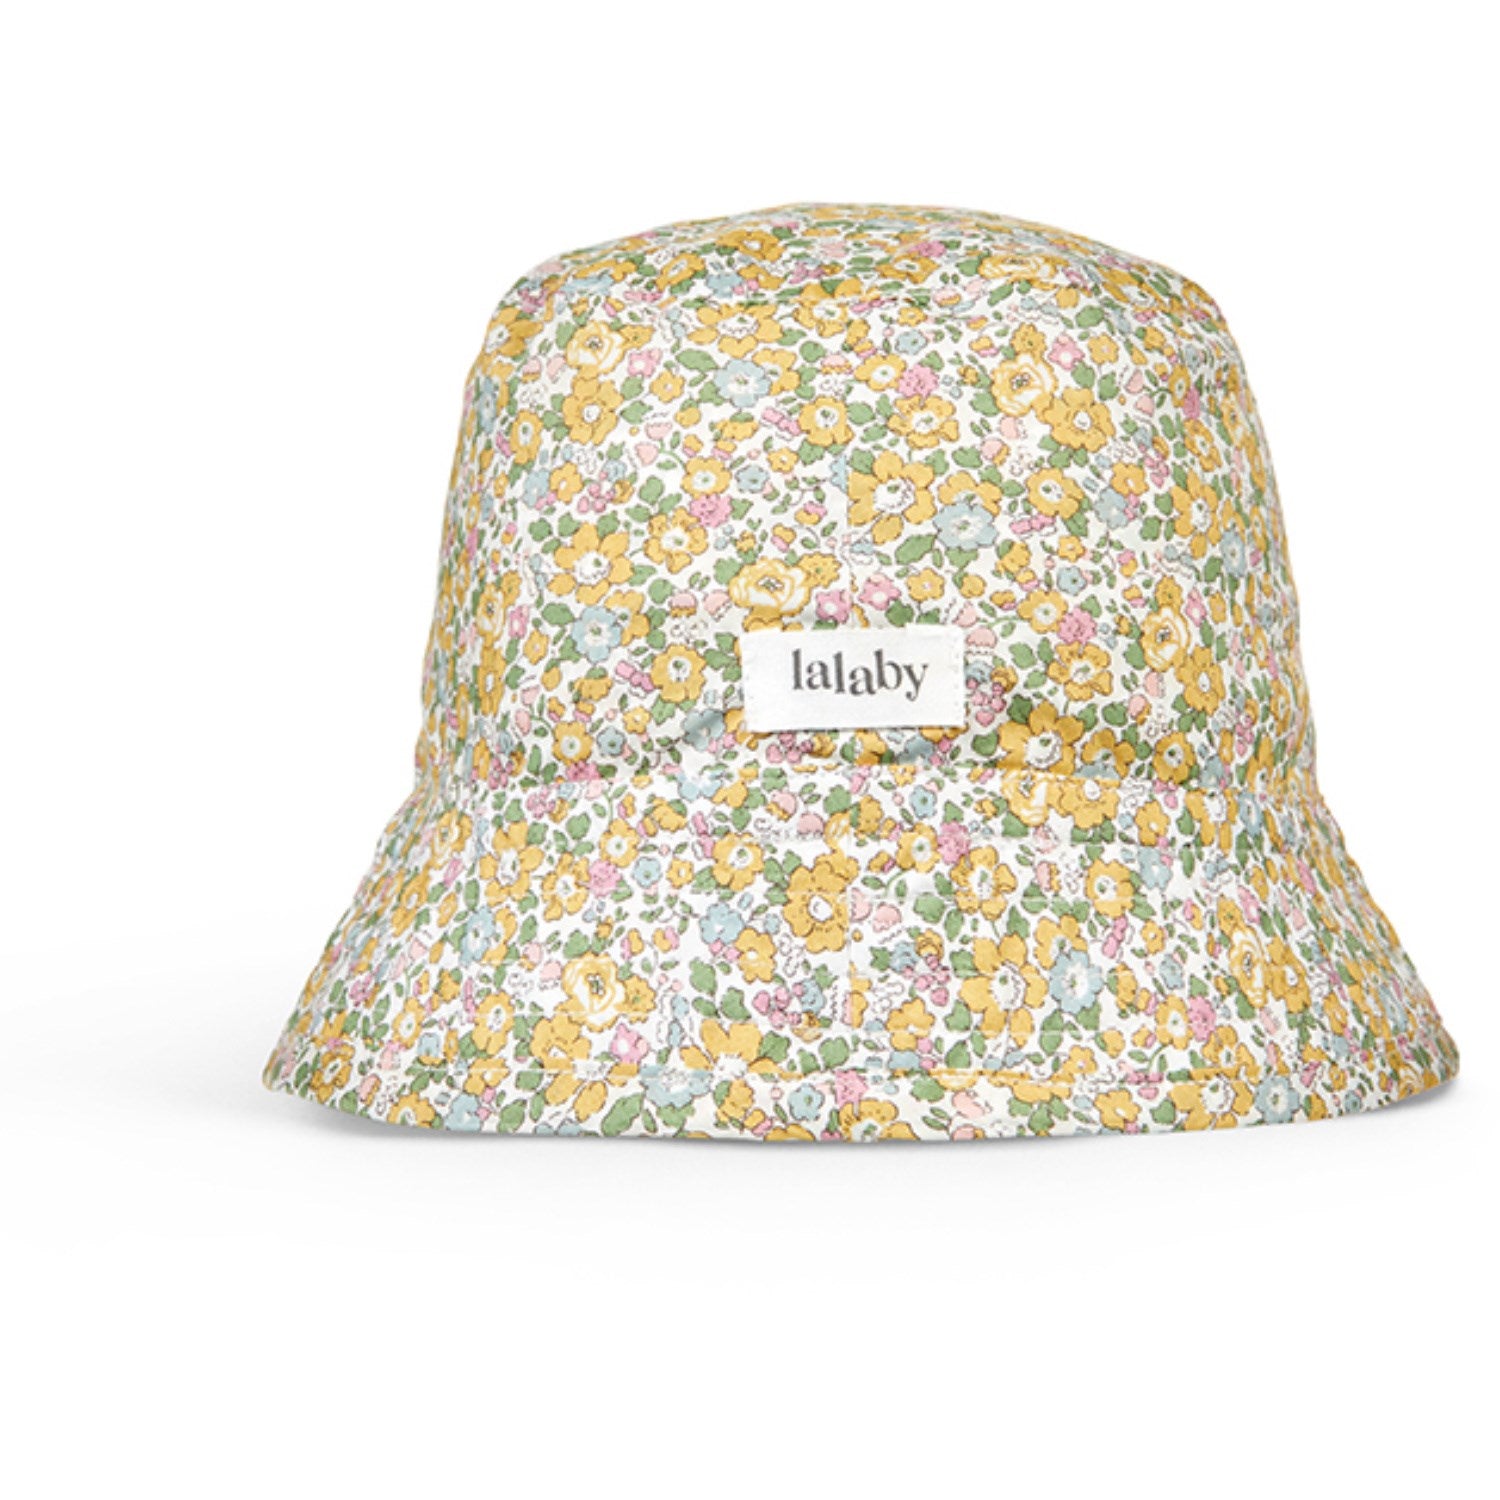 Lalaby Betsy Ann Loui Hat - Betsy Ann 6